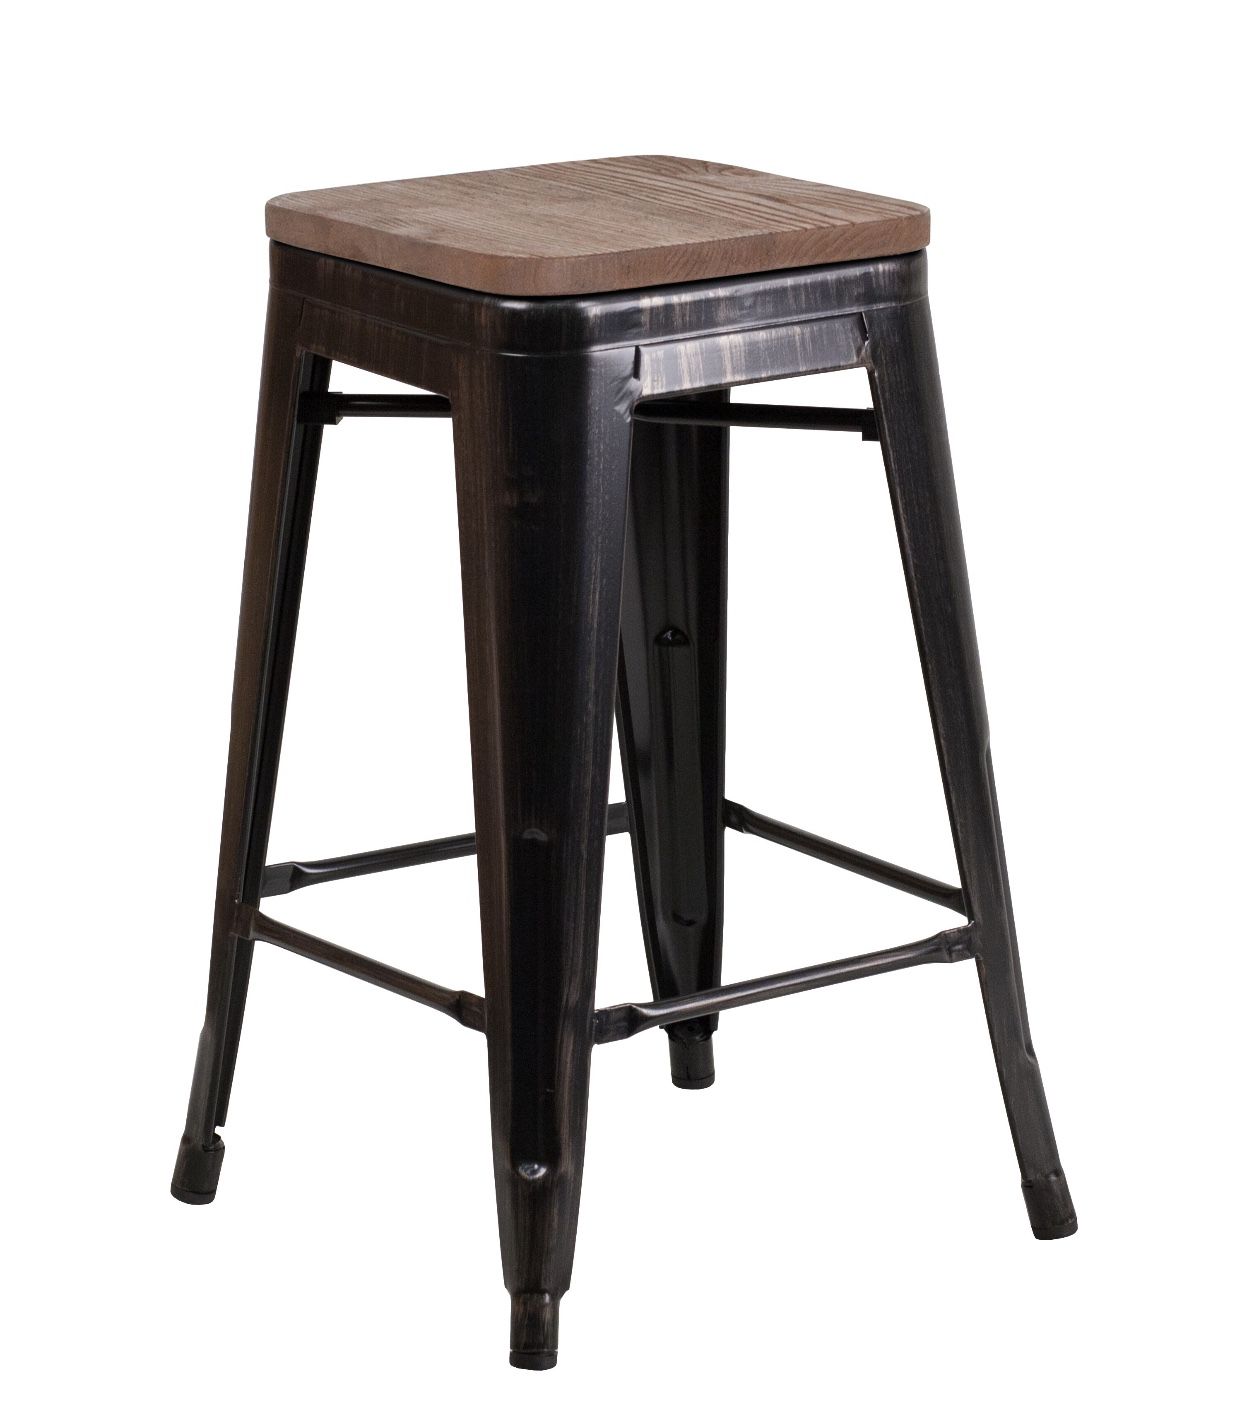 24” high backless metal counter height stool with square wood seat